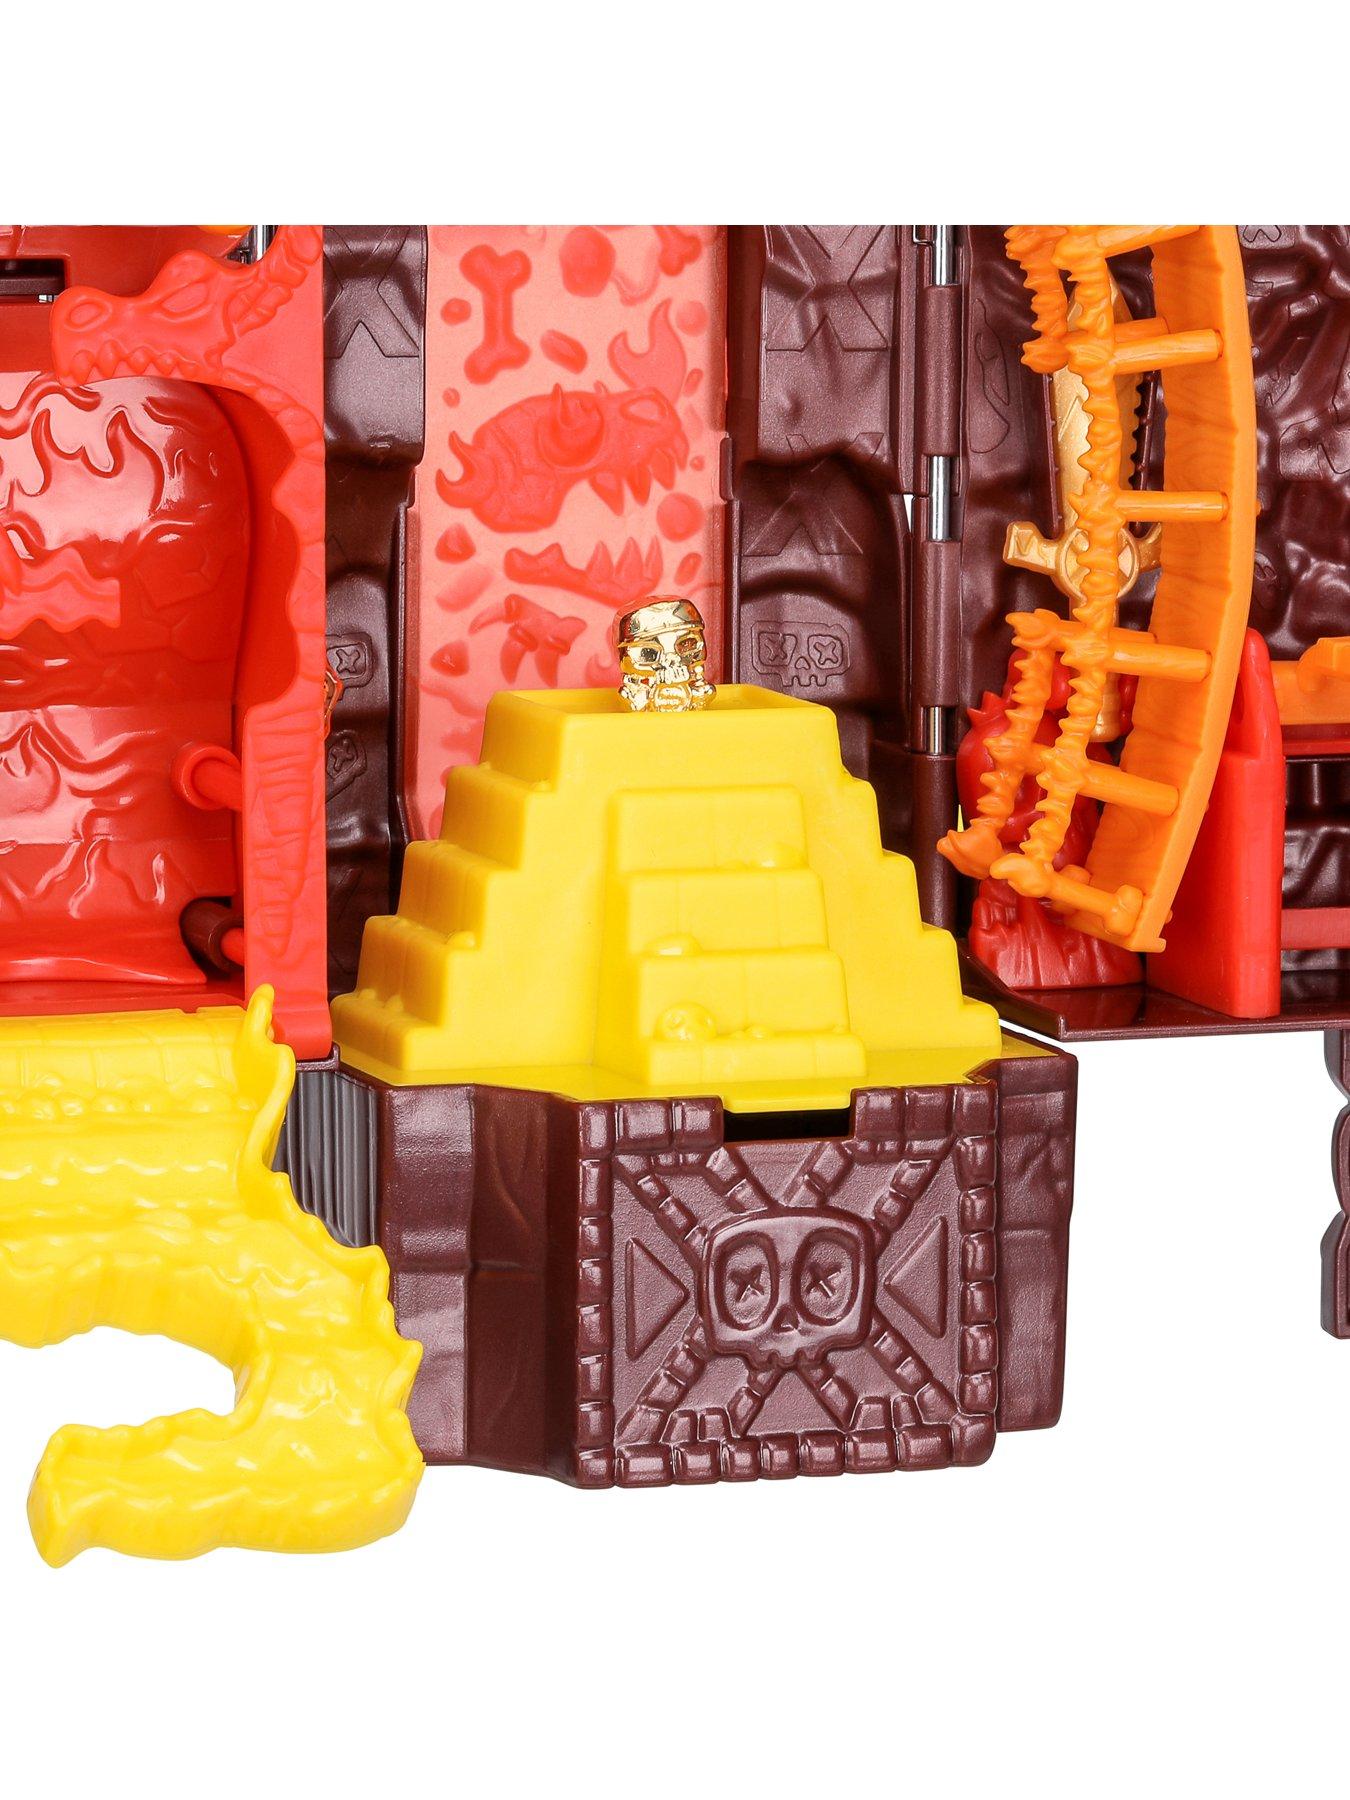 TREASURE X Lost Lands Skull Island Lava Tower Micro Playset, 15 Levels of  Adventure. Survive The Traps and Discover 2 Micro Sized Action Figures.  Will